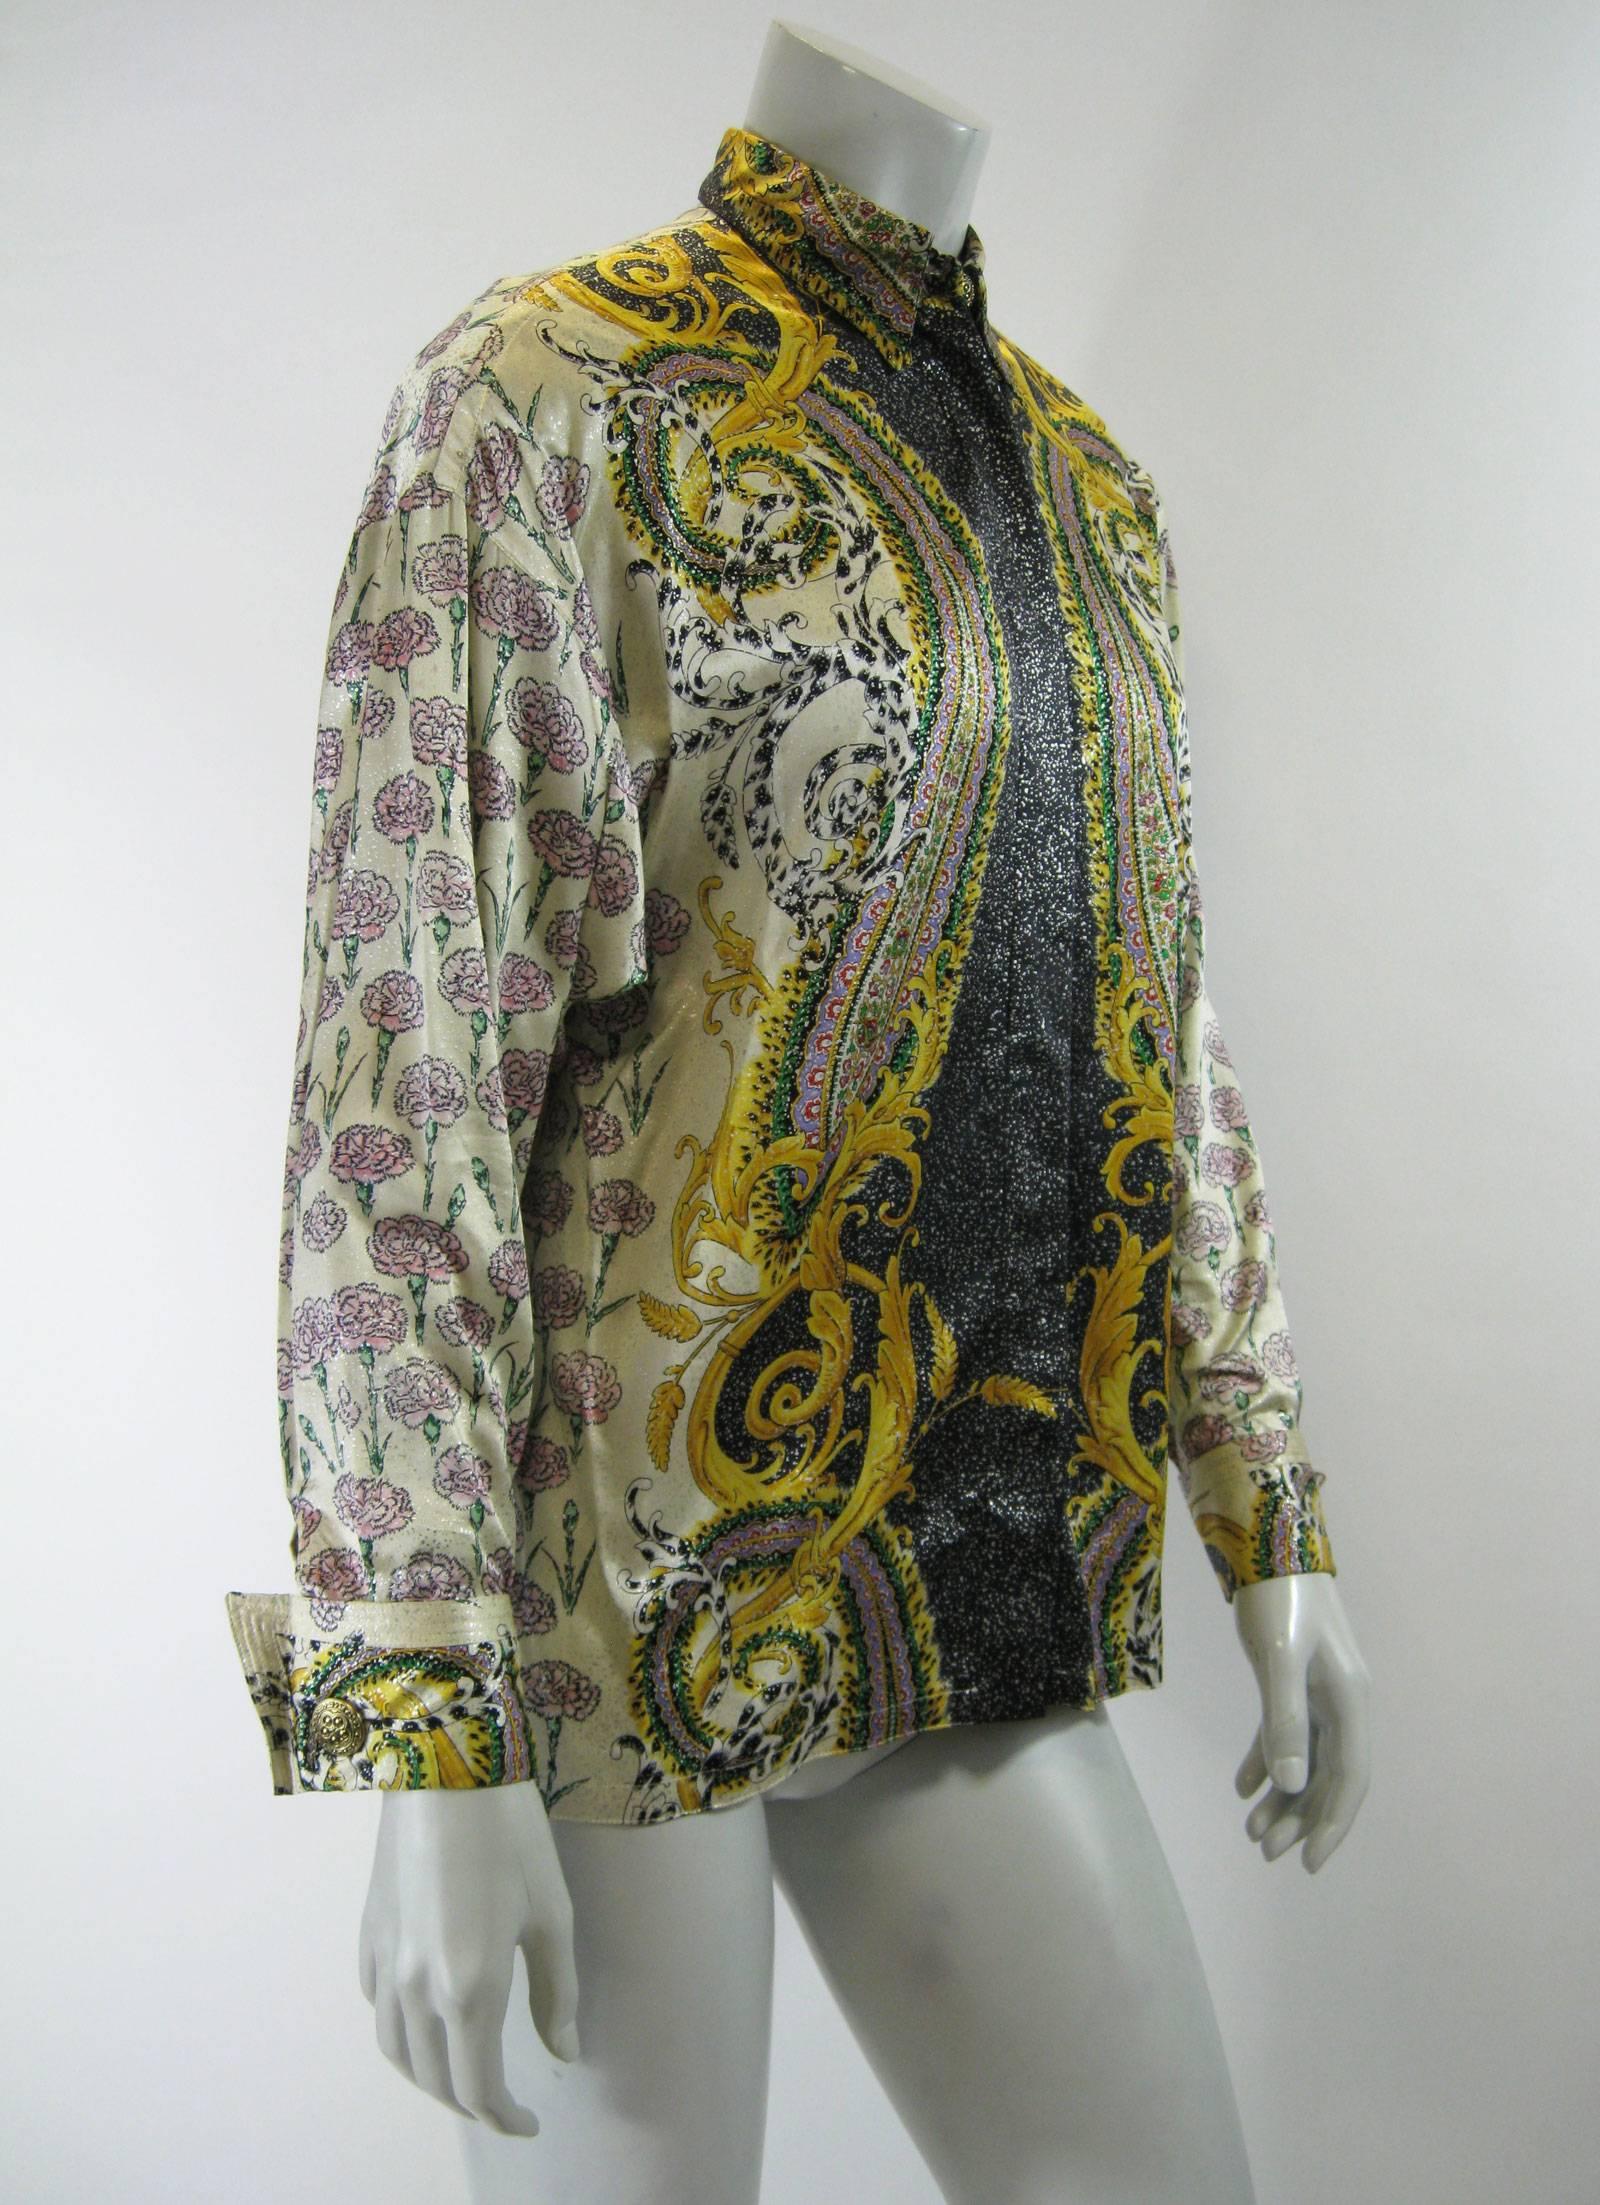 Vintage Gianni Versace silk blouse.
Cream with pale pink flowers, silver metallic speckles
with gold, green, black, red and lavender swirling patterns.
Hidden button placket.
Button down collar,
French cuffs with detailed buttons.
No size